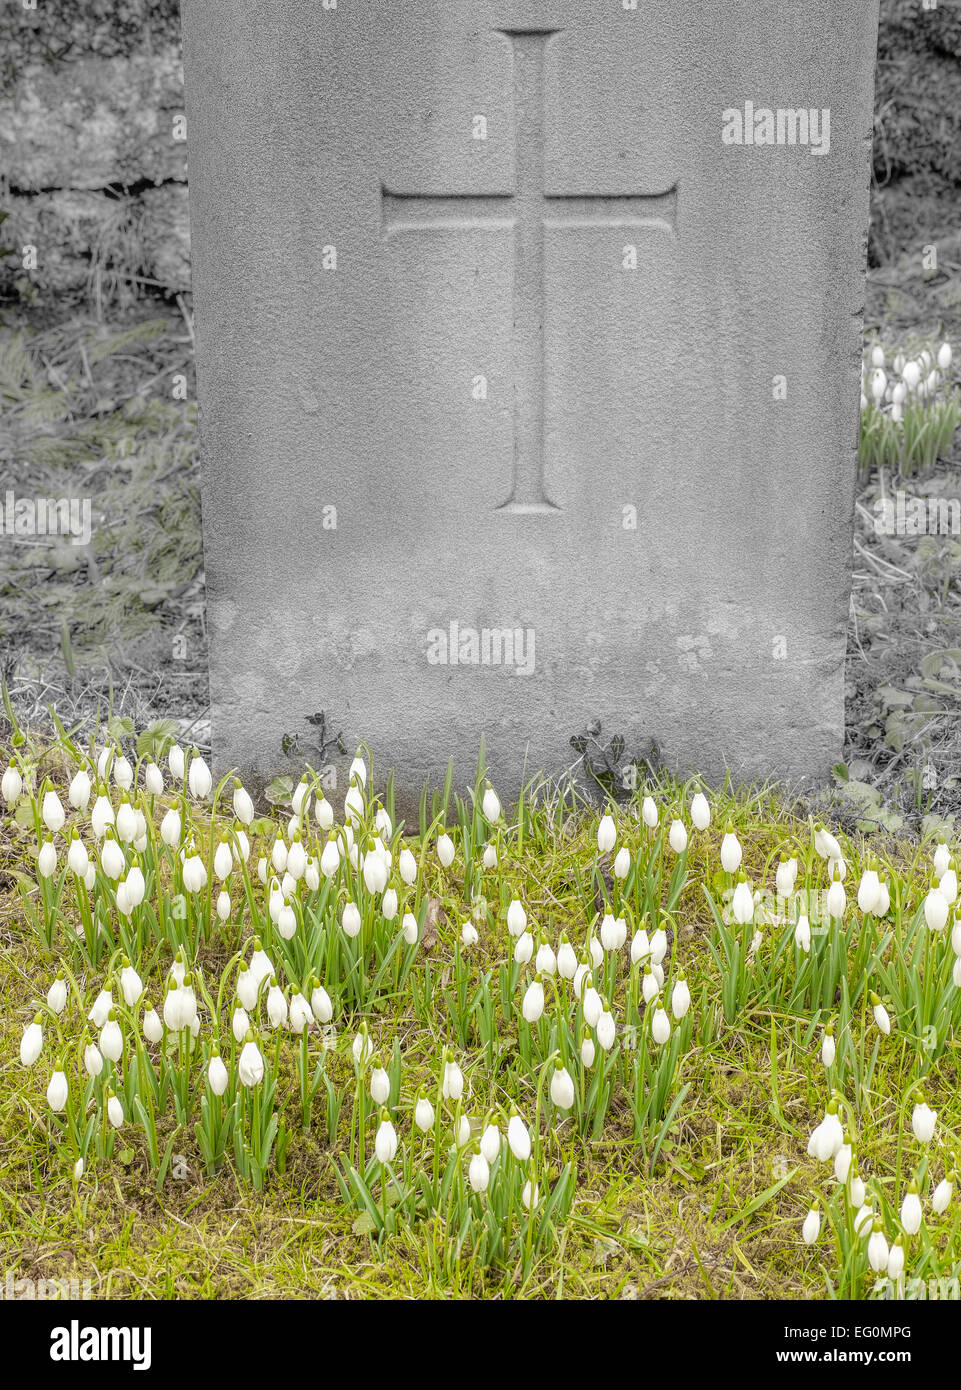 Snowdrops bloom on a grave in front of a tombstone as a sign that life follows death just as spring follows winter Stock Photo